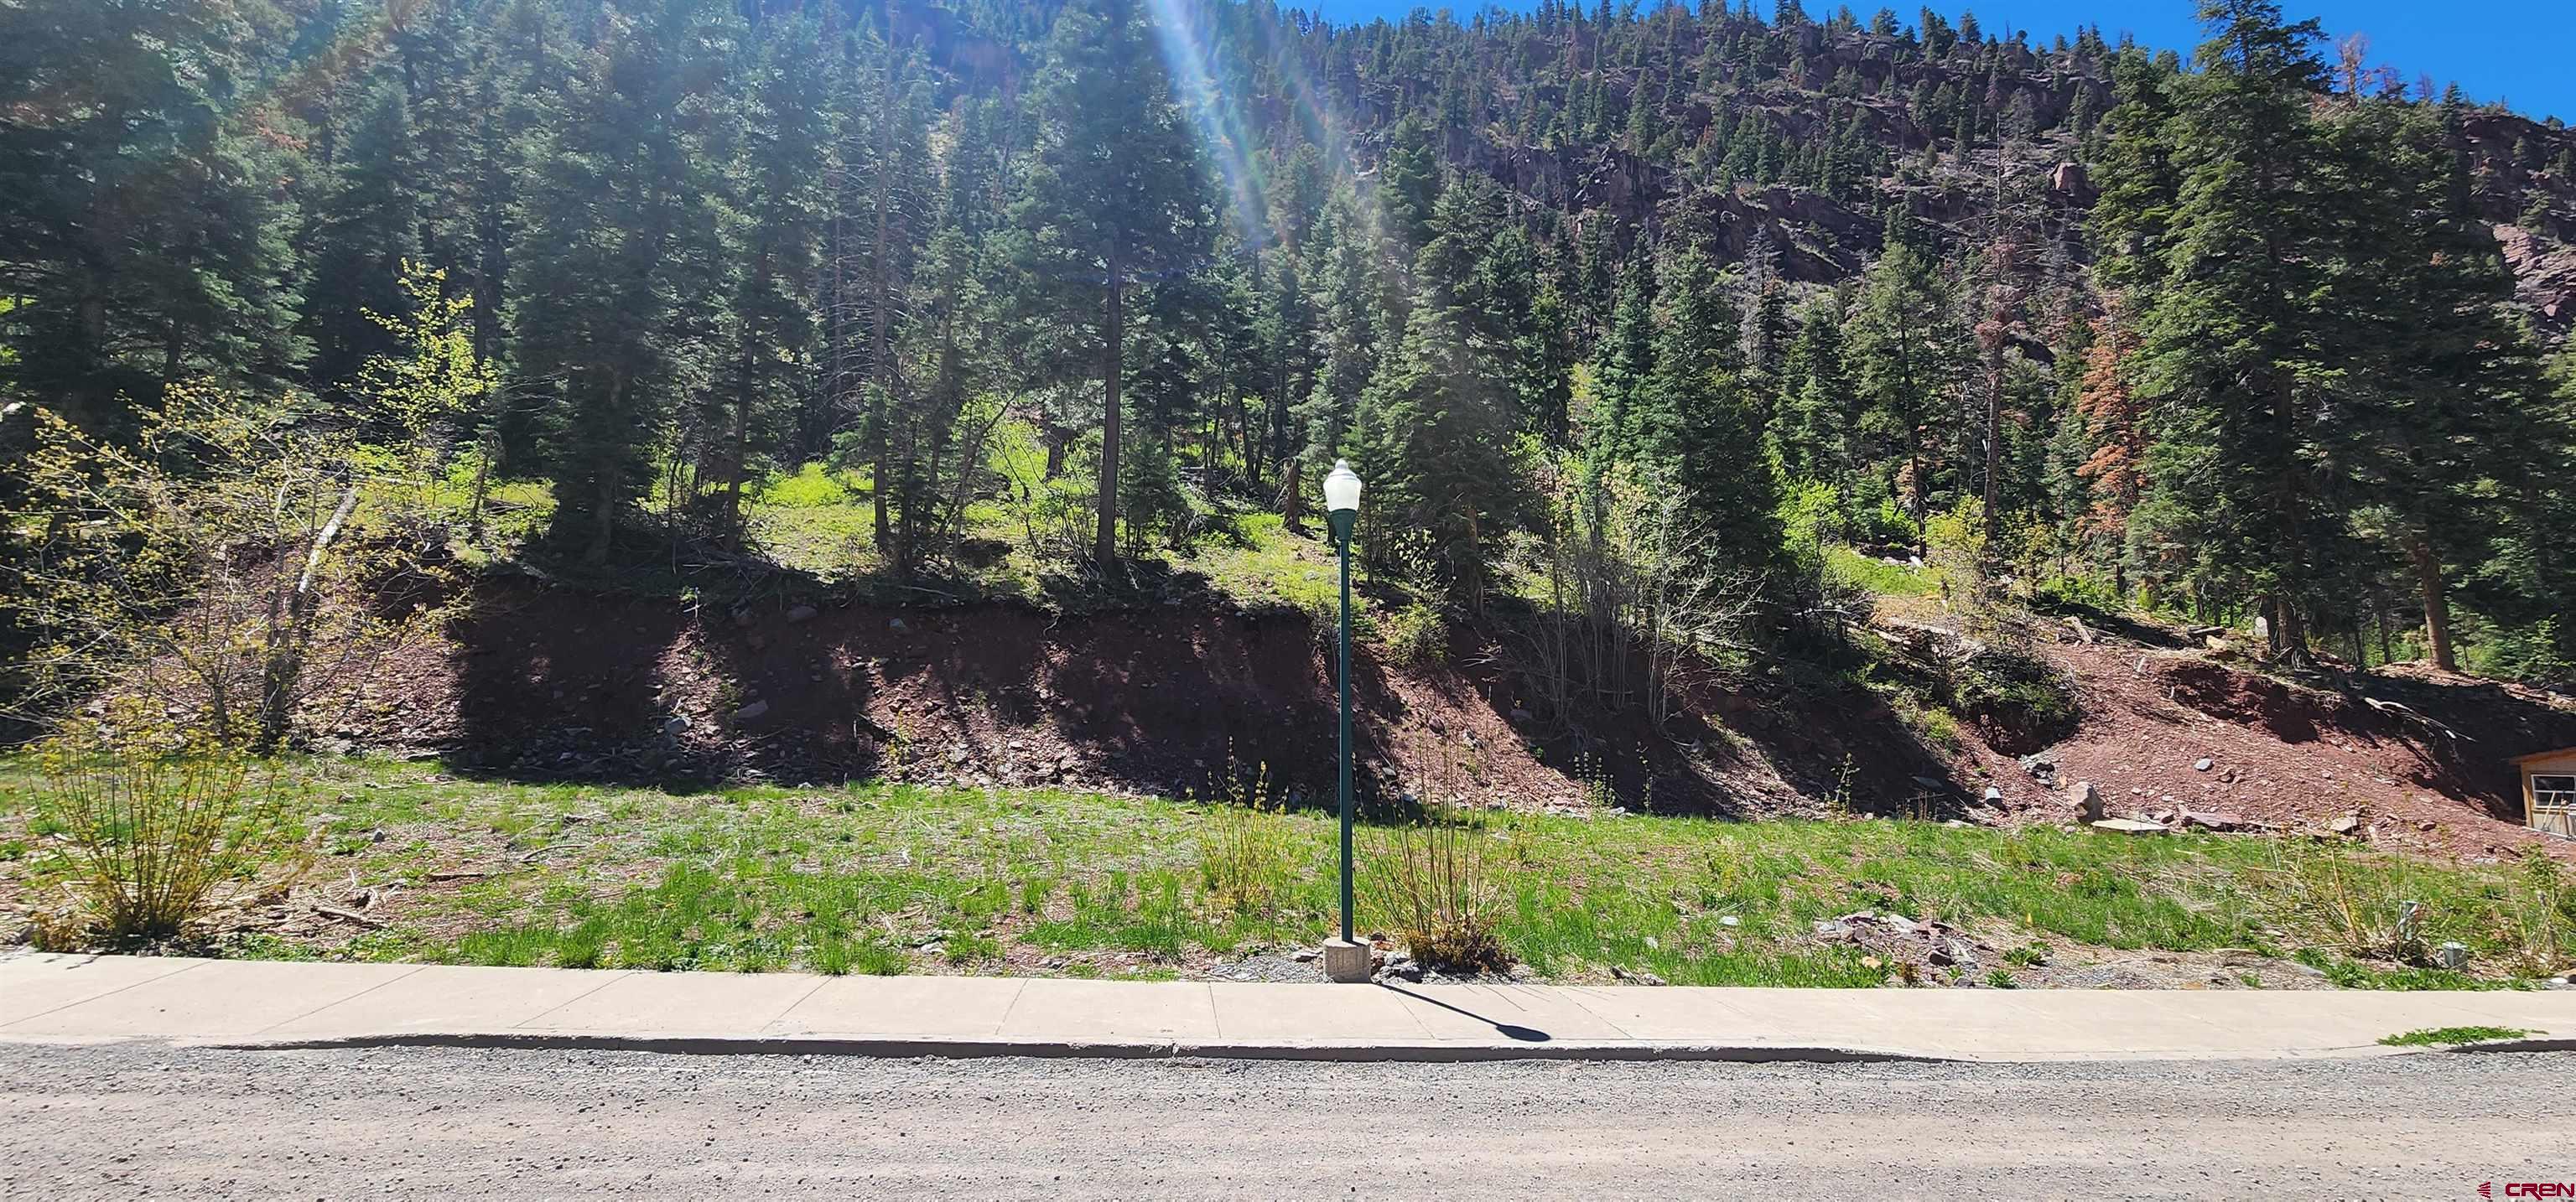 Ready to build lot in the resort City of Ouray. All utilities at the lot line. Property backs to National Forest with easy access to the Silver Shield trail. Unique views of old mining structures on the mountain side. Walk to town on the North Ouray Corridor trail loop along the Uncompahgre River. Zoning allows single family, multi-family, guest residence and other uses.